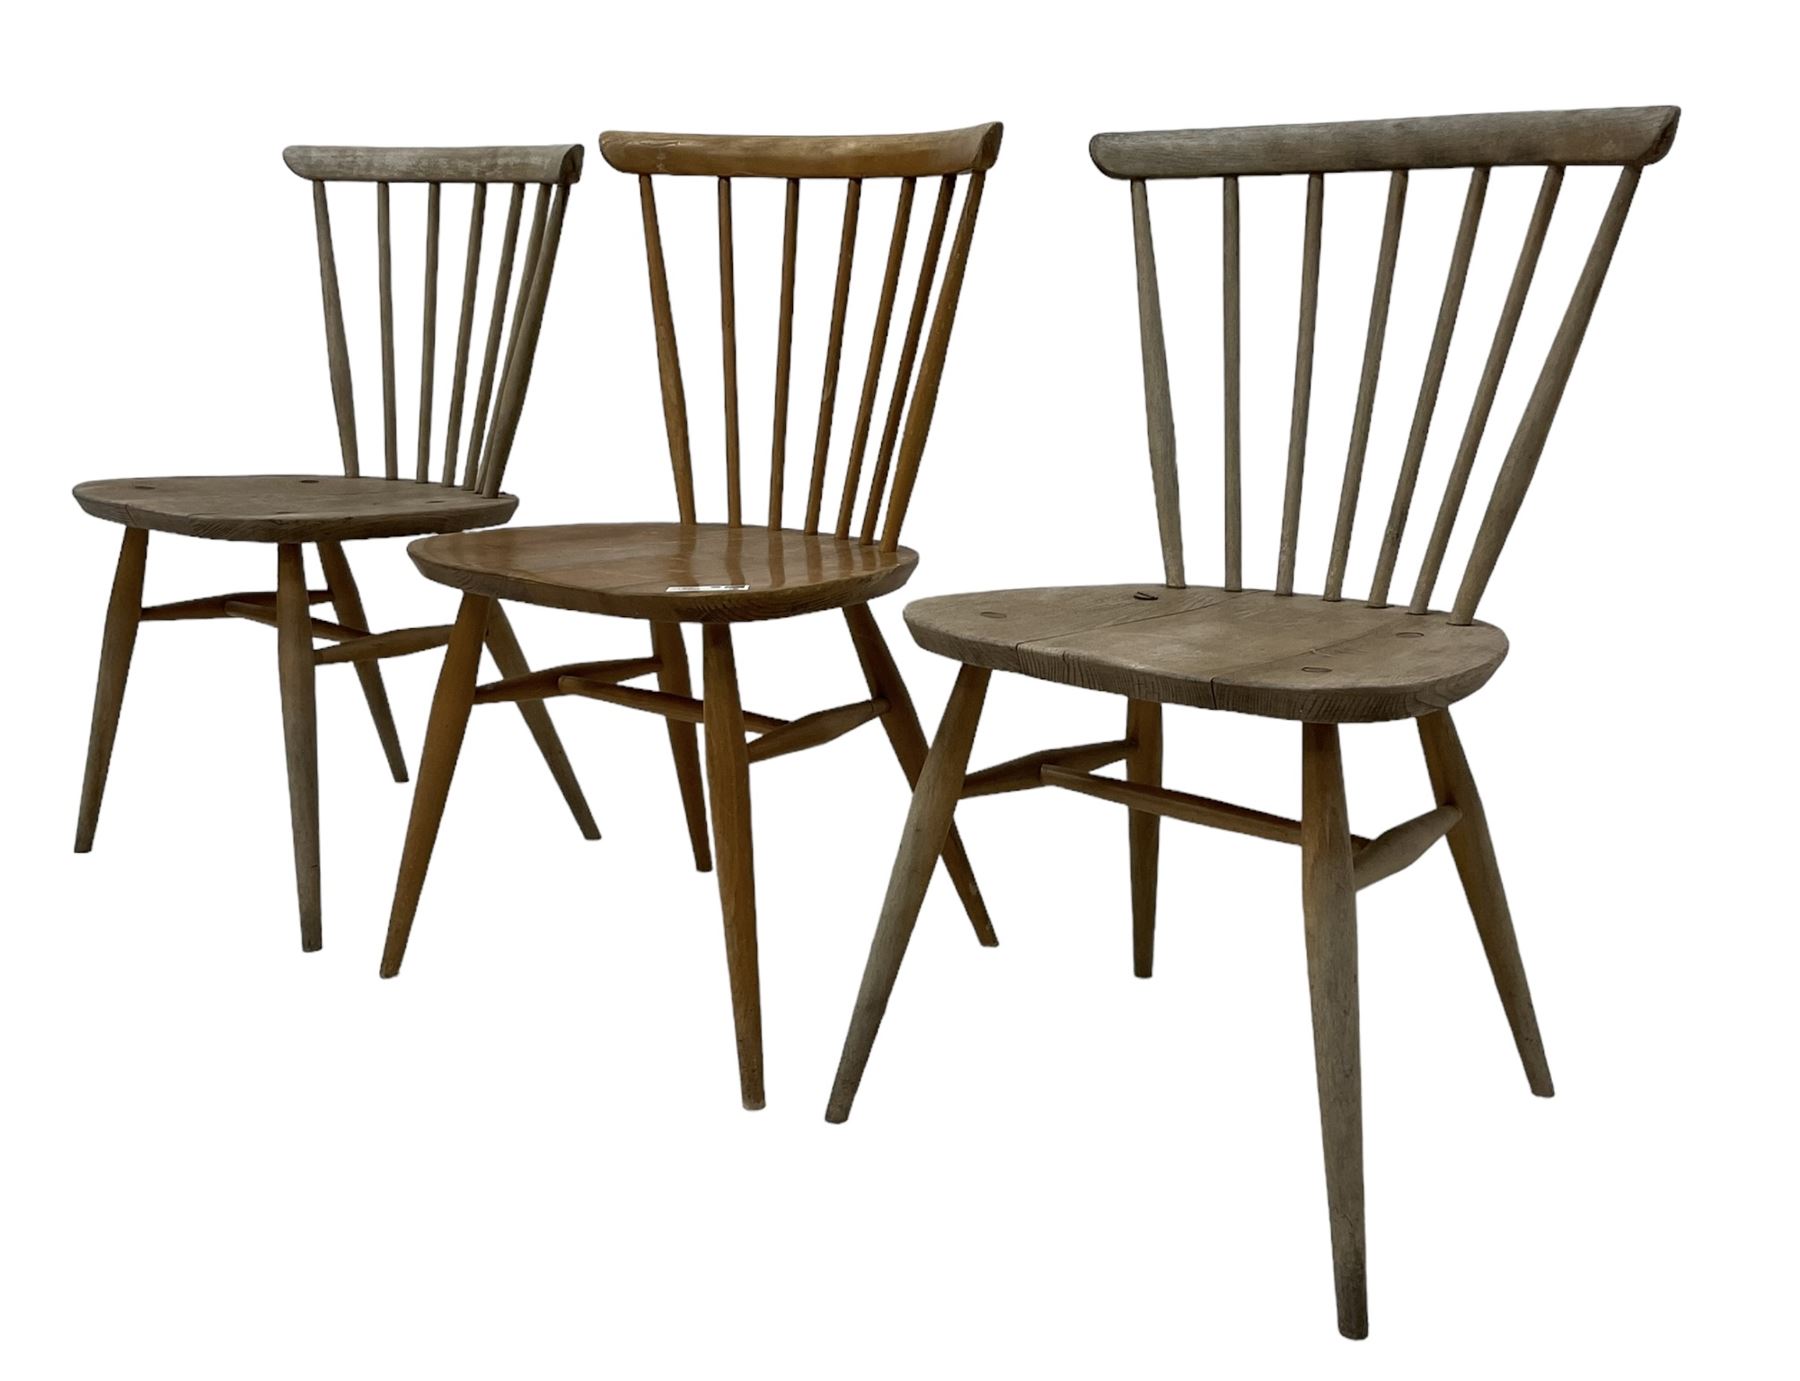 Ercol - 1960s set of three elm stick back chairs - Image 2 of 9